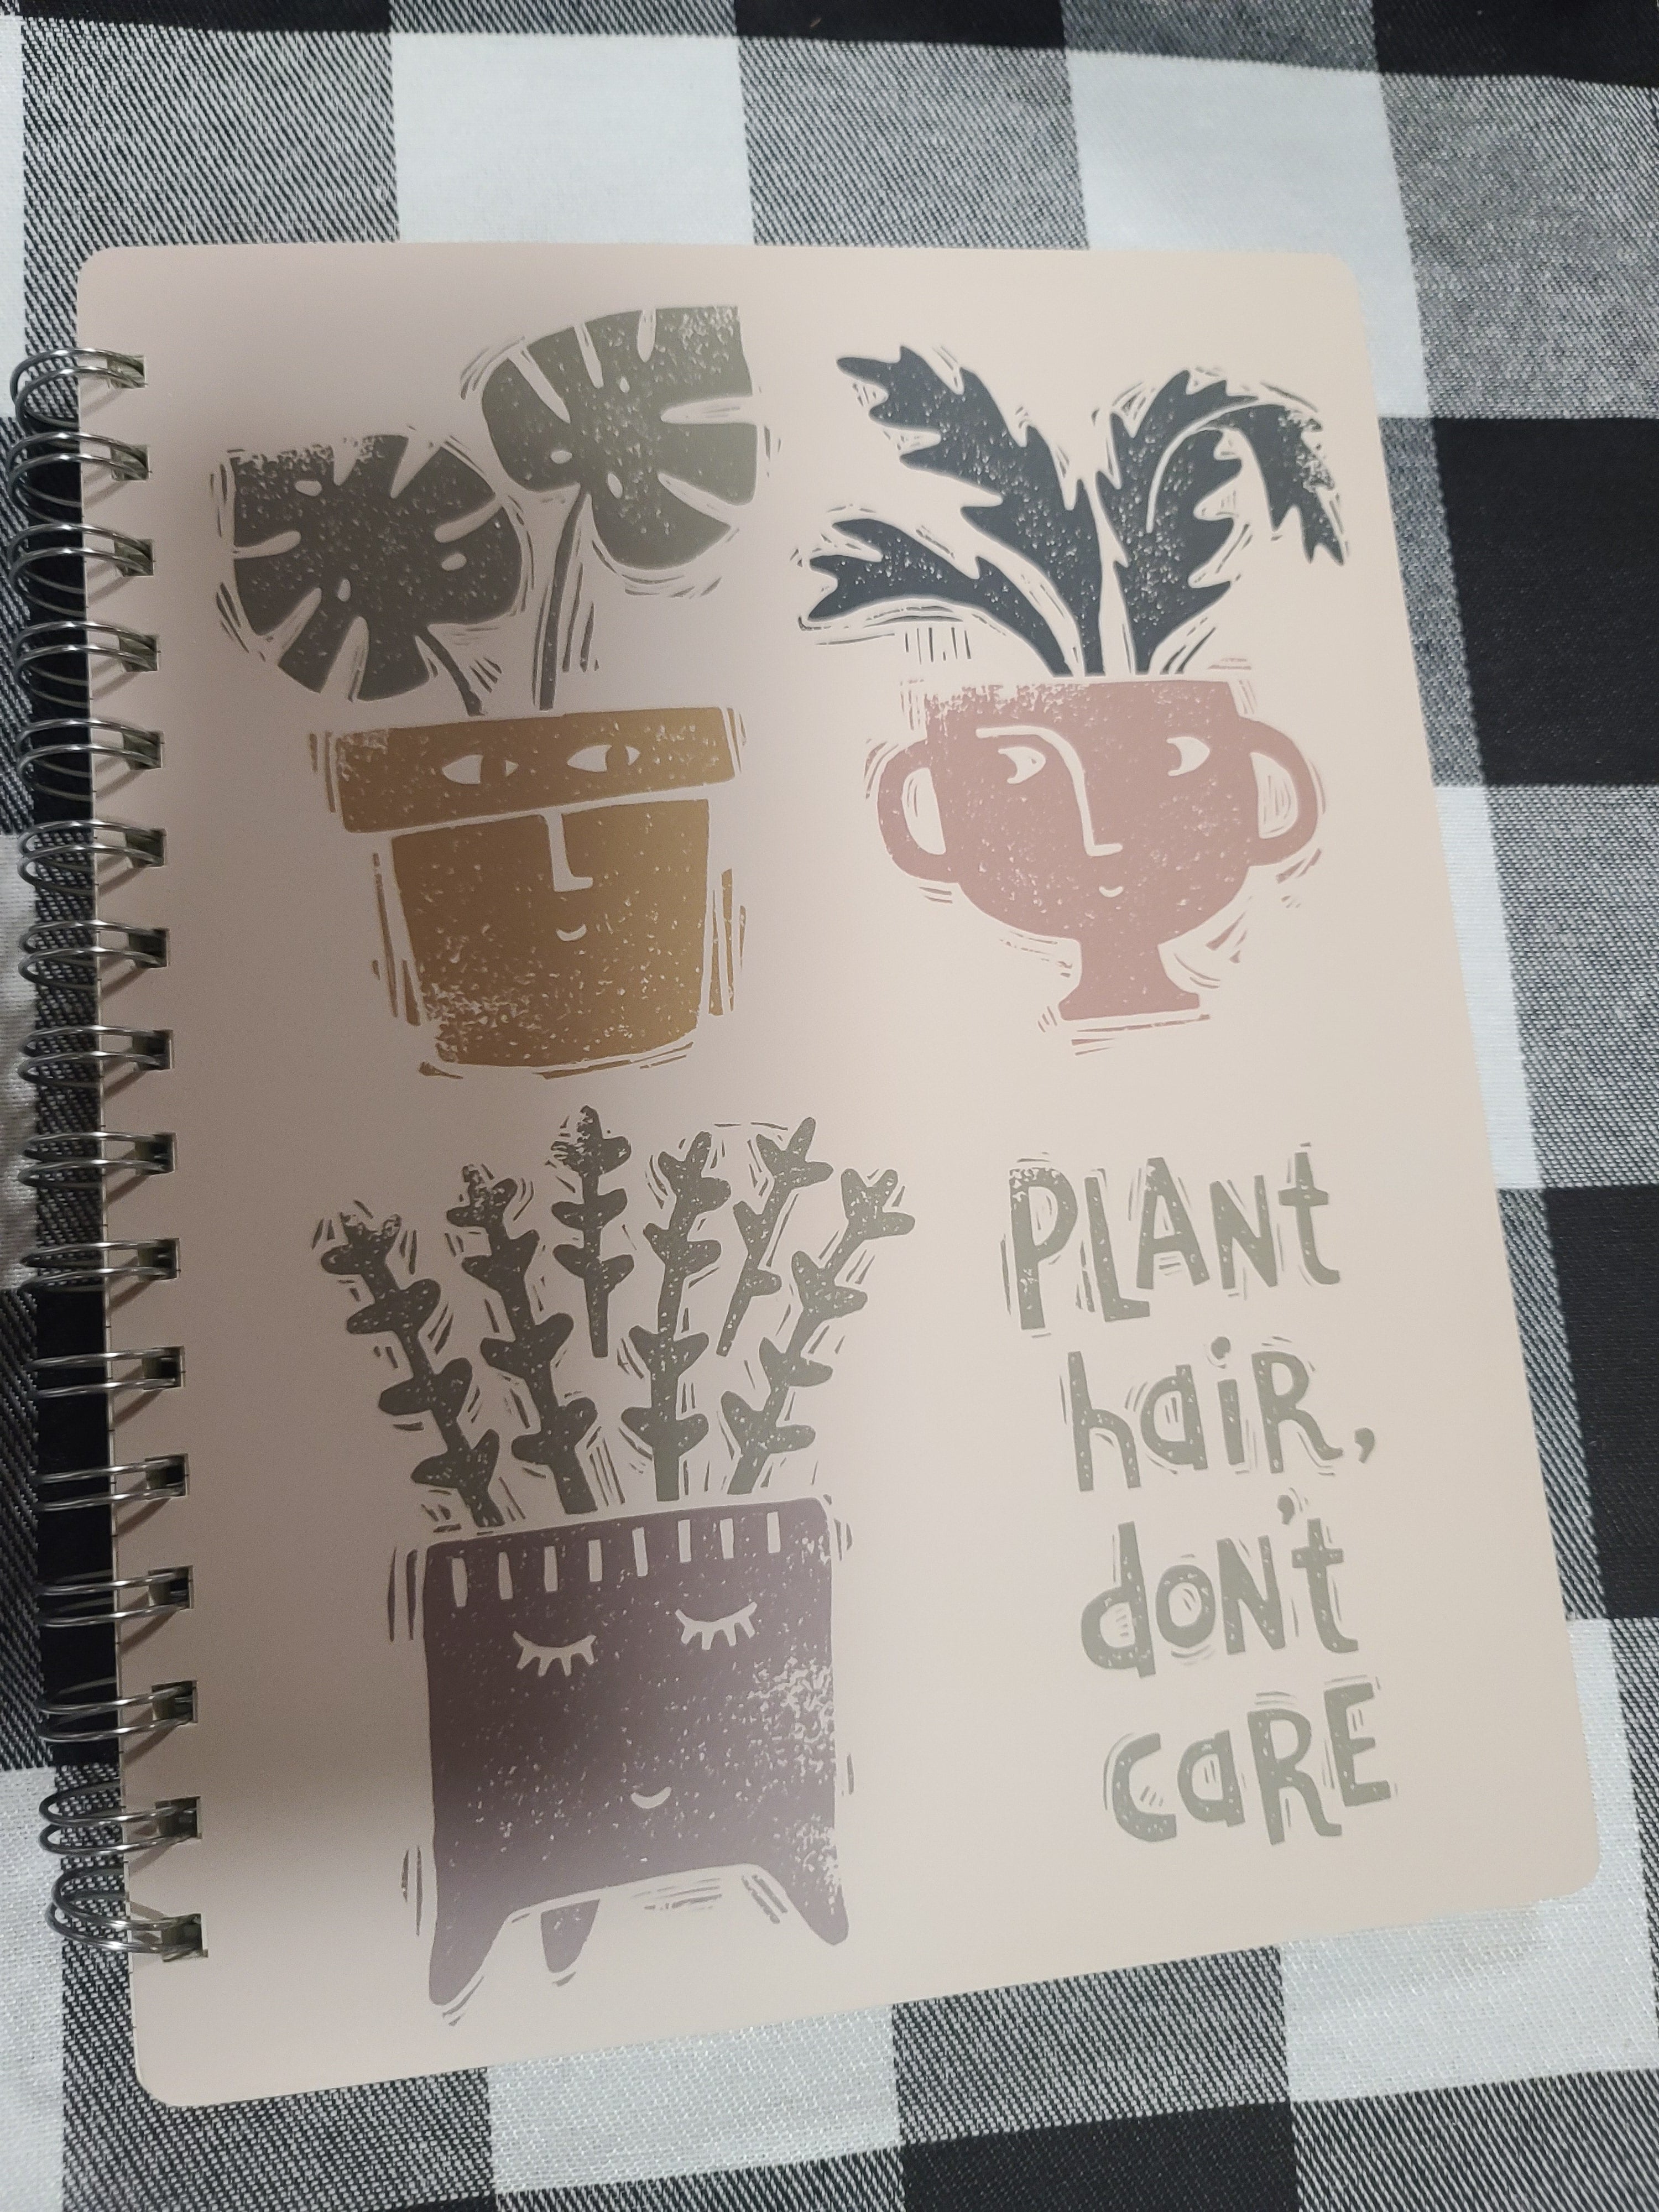 Plant hair don't care notebook